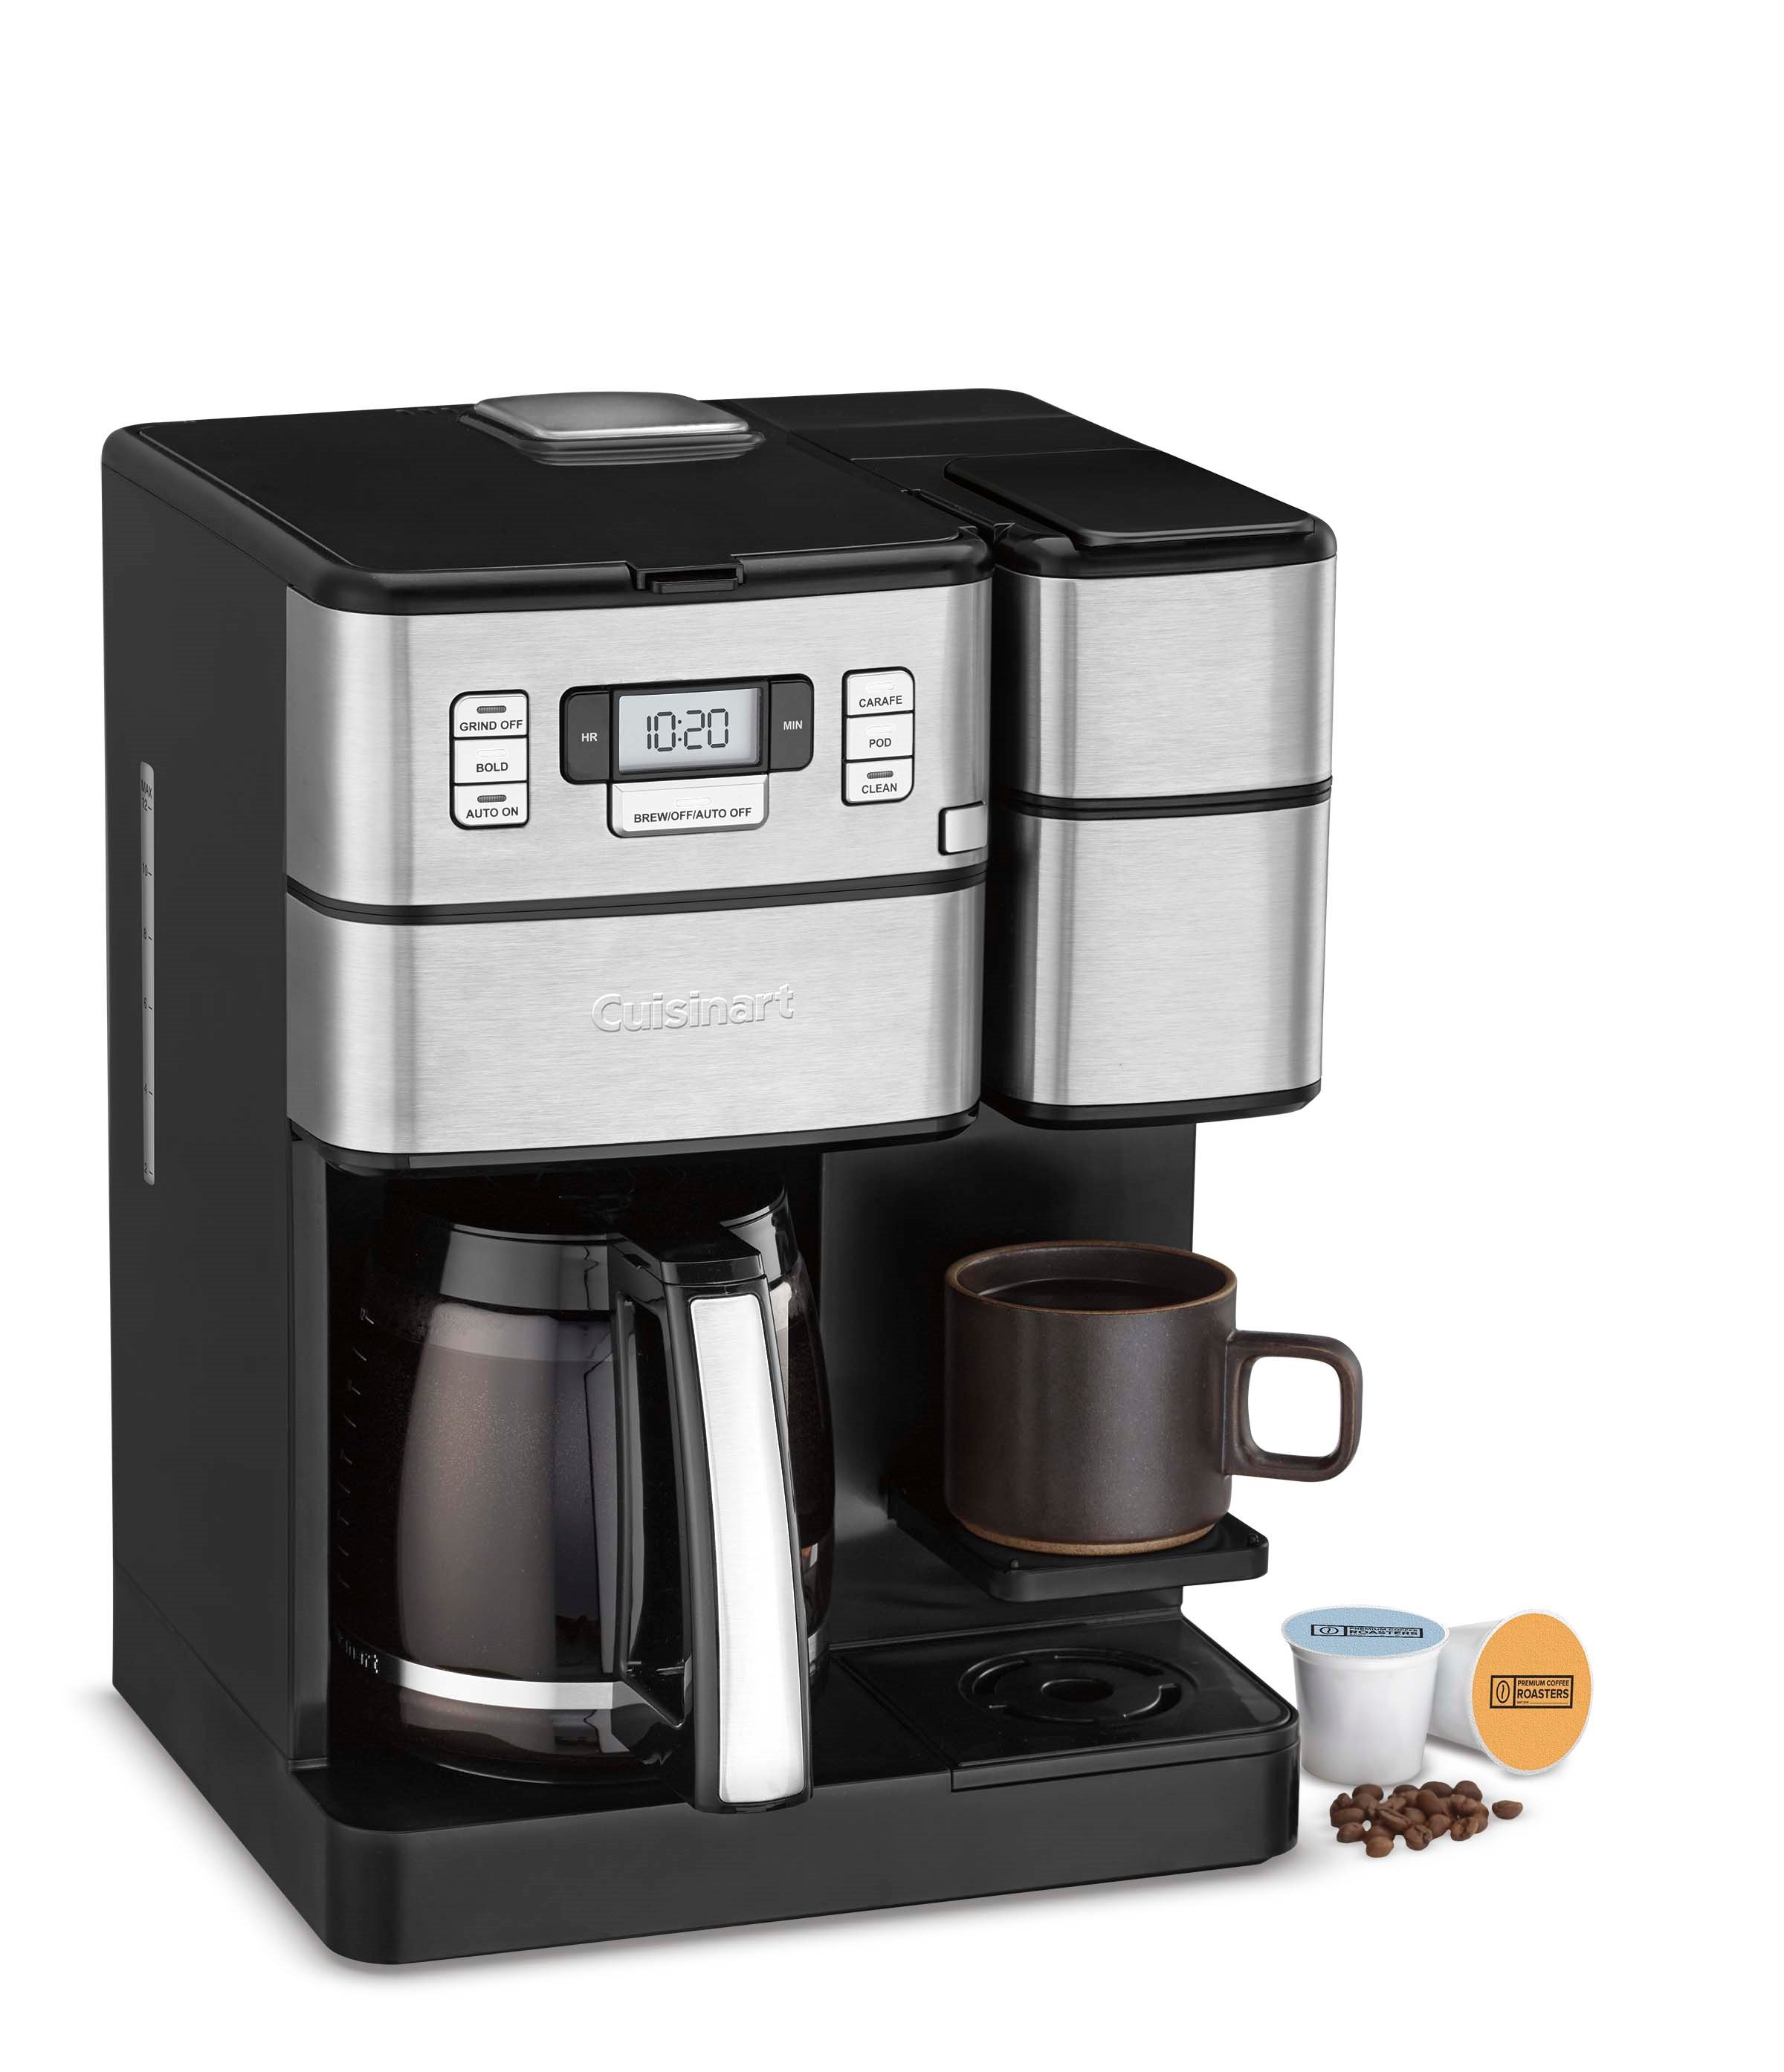 Cuisinart 12-Cup, Black Stainless Coffee Center 2 in. 1-Coffee